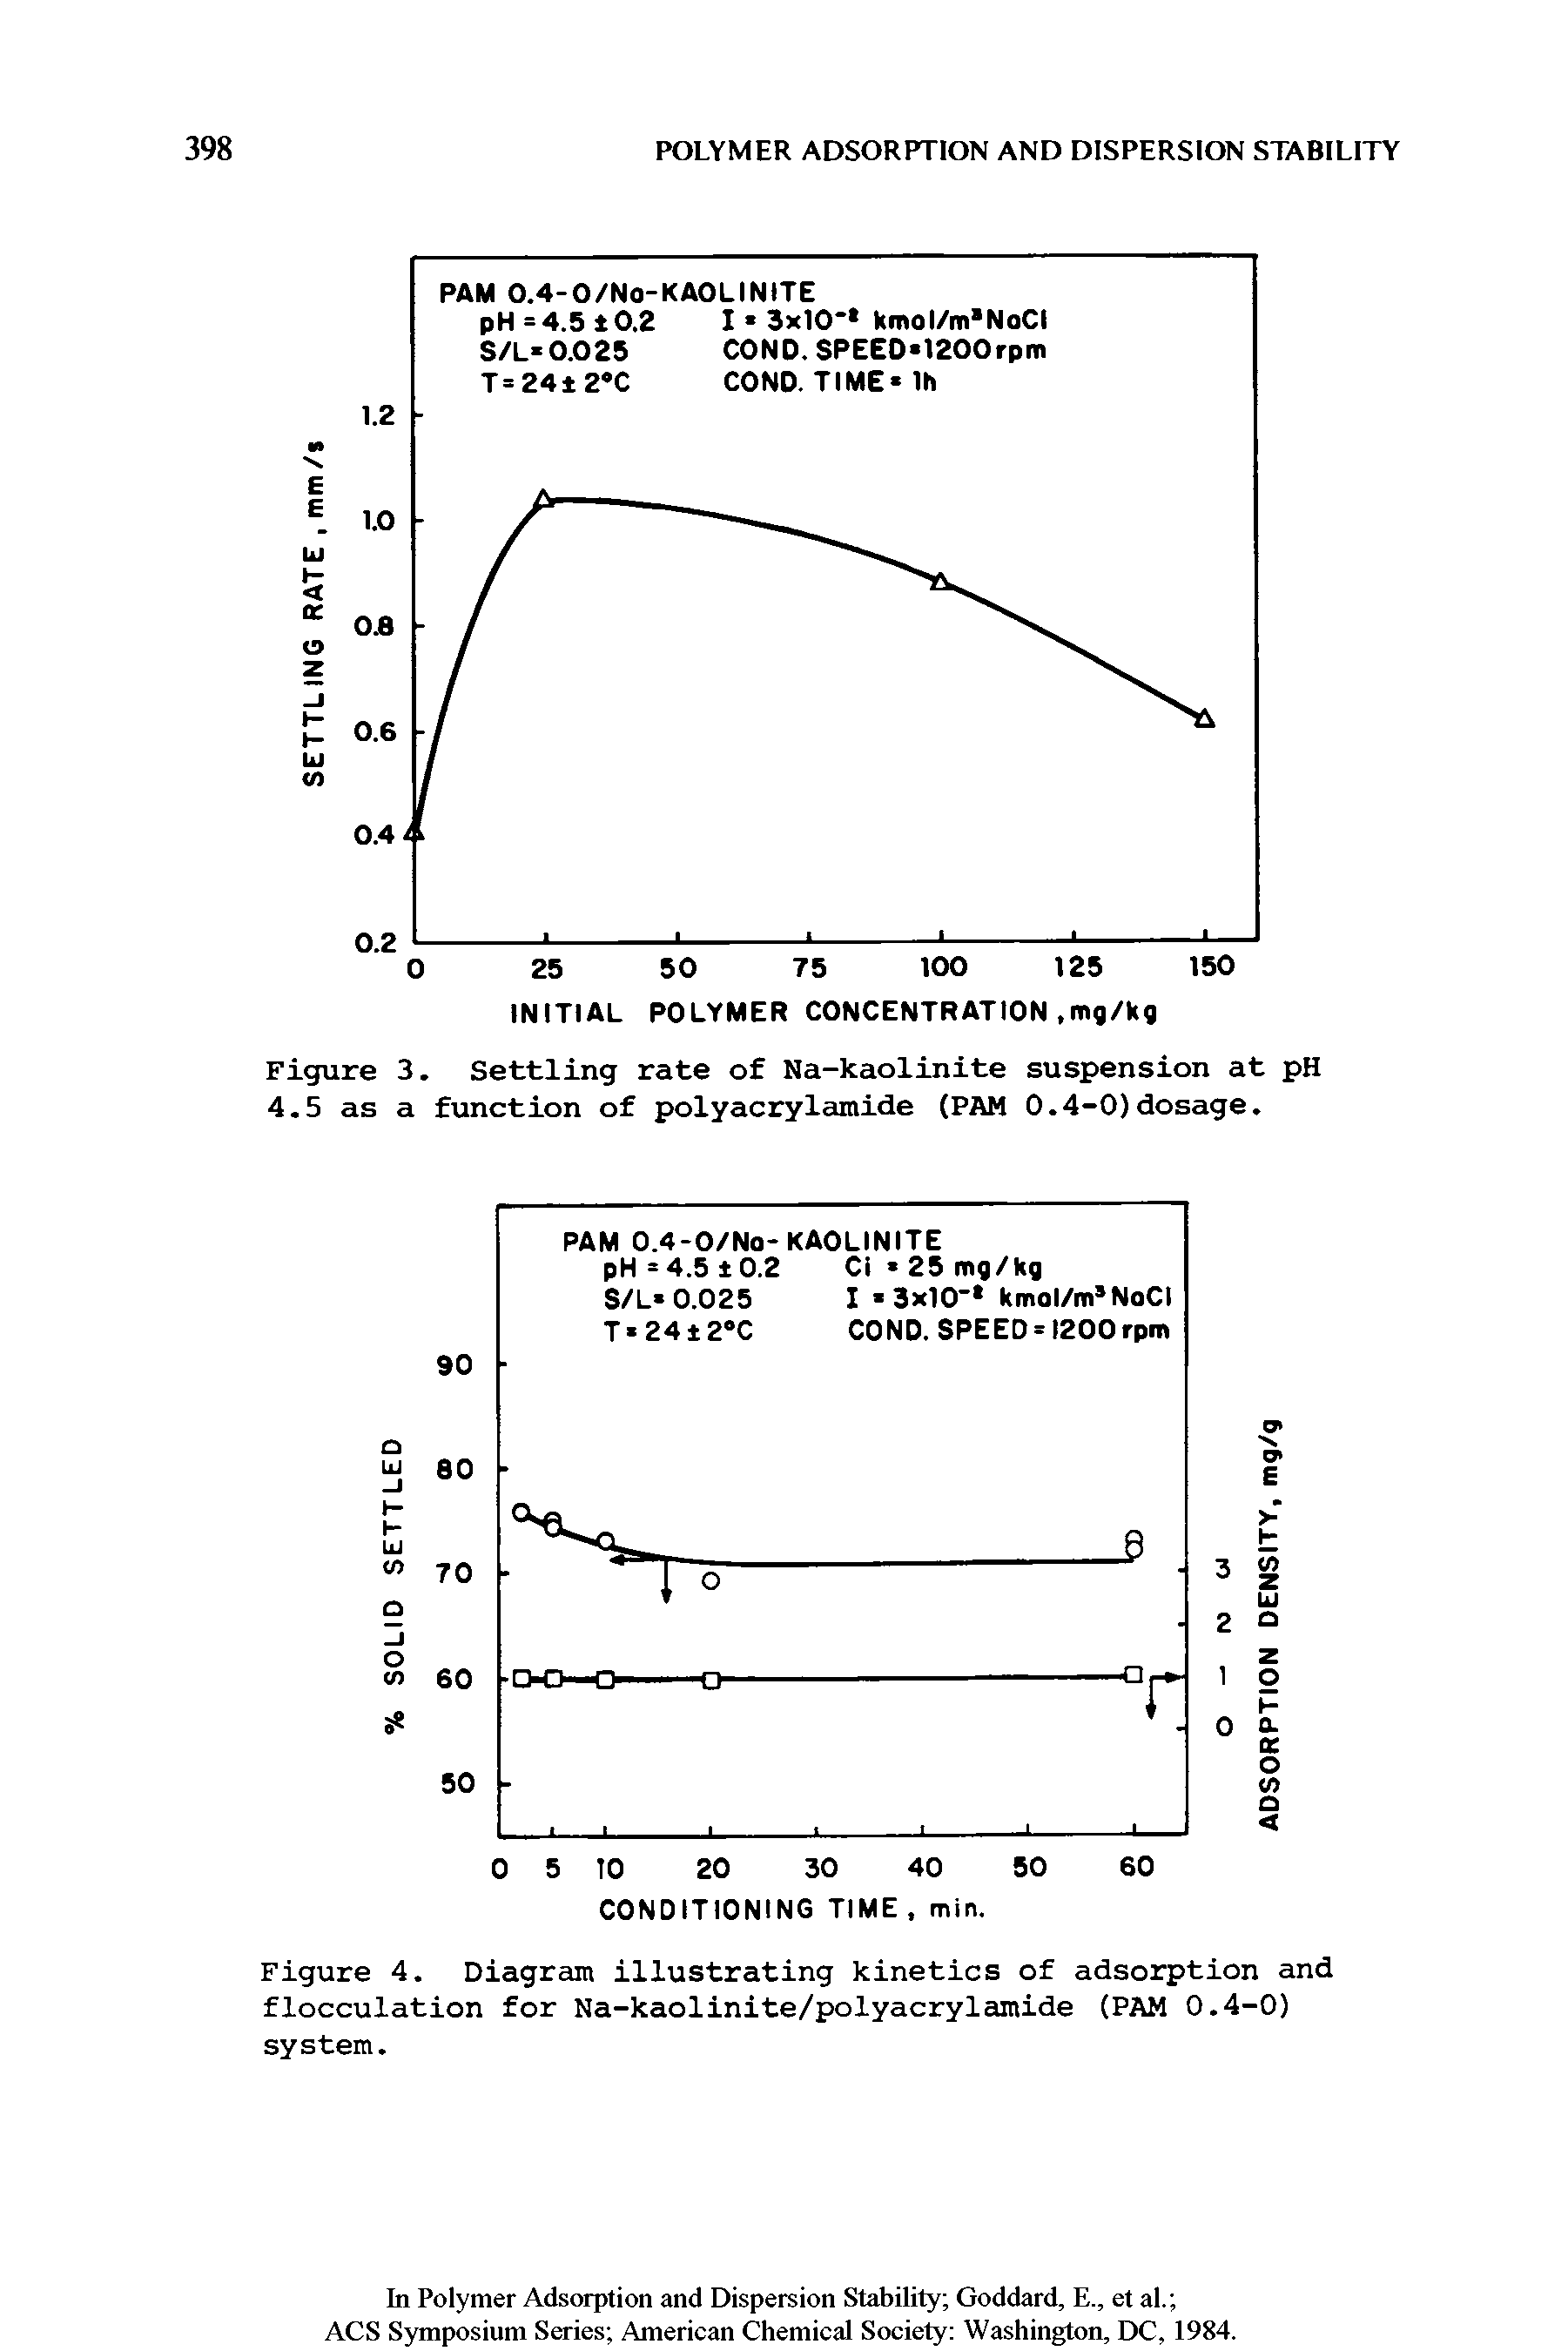 Figure 3. Settling rate of Na-kaolinite suspension at pH 4.5 as a function of polyacrylamide (PAM 0.4-0)dosage.